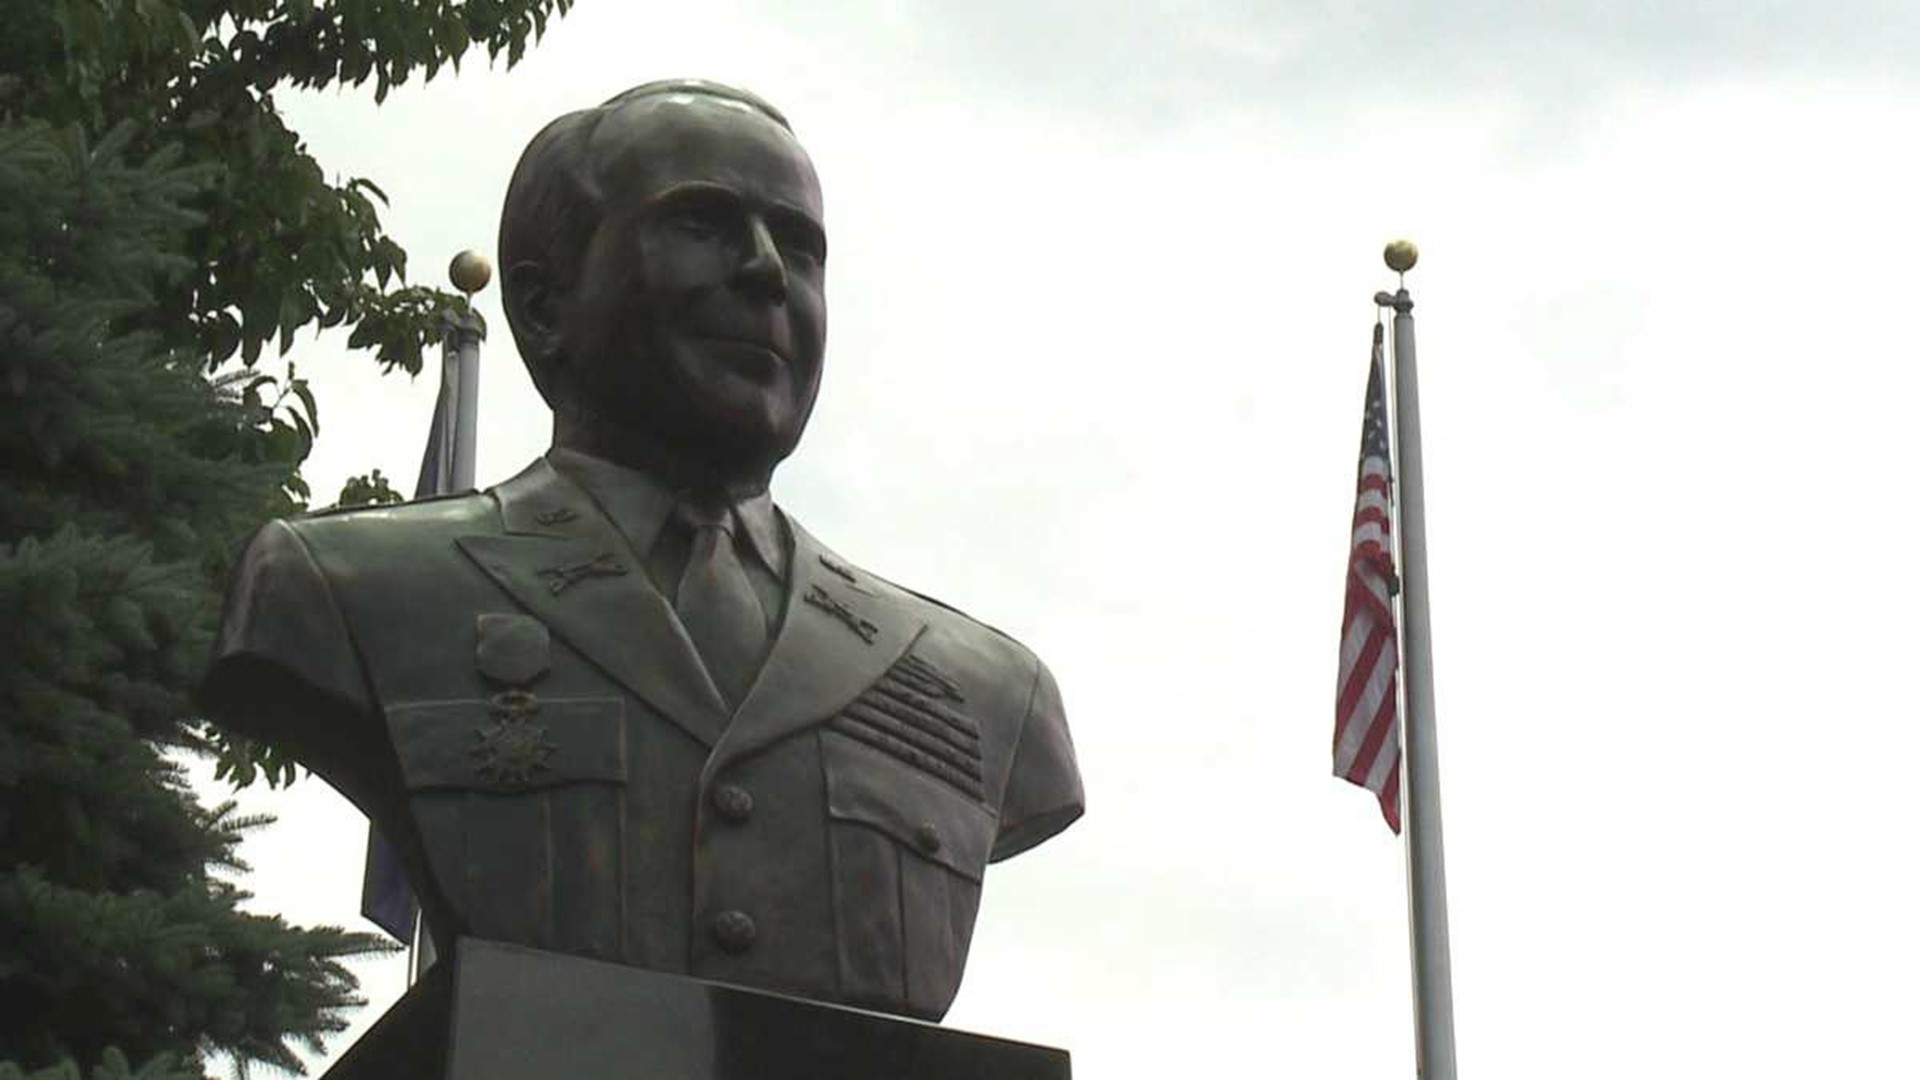 Carbondale Native Honored With Statue